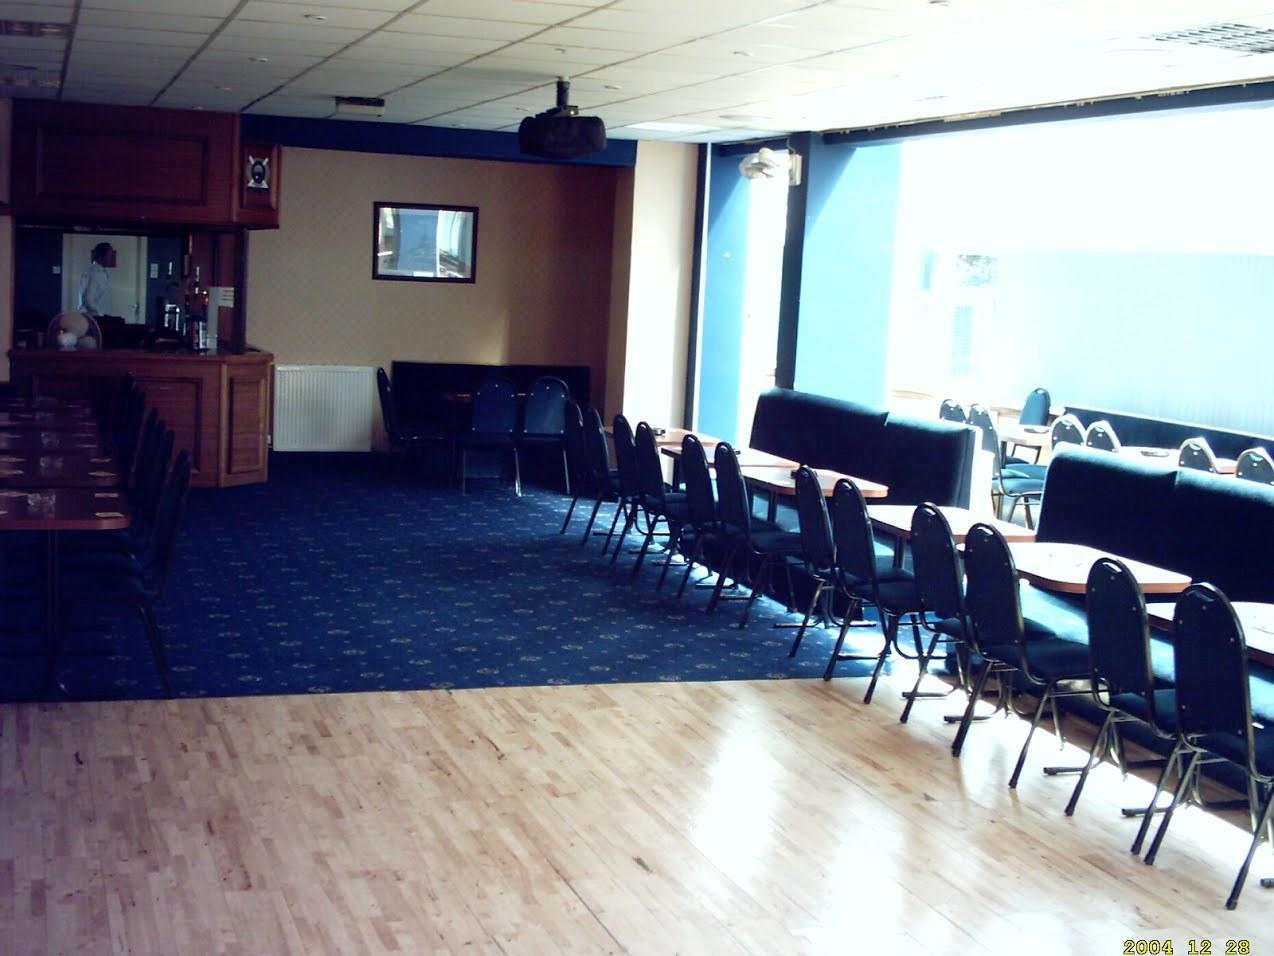 Parkside Bowling Club, Exclusive Hire photo #1